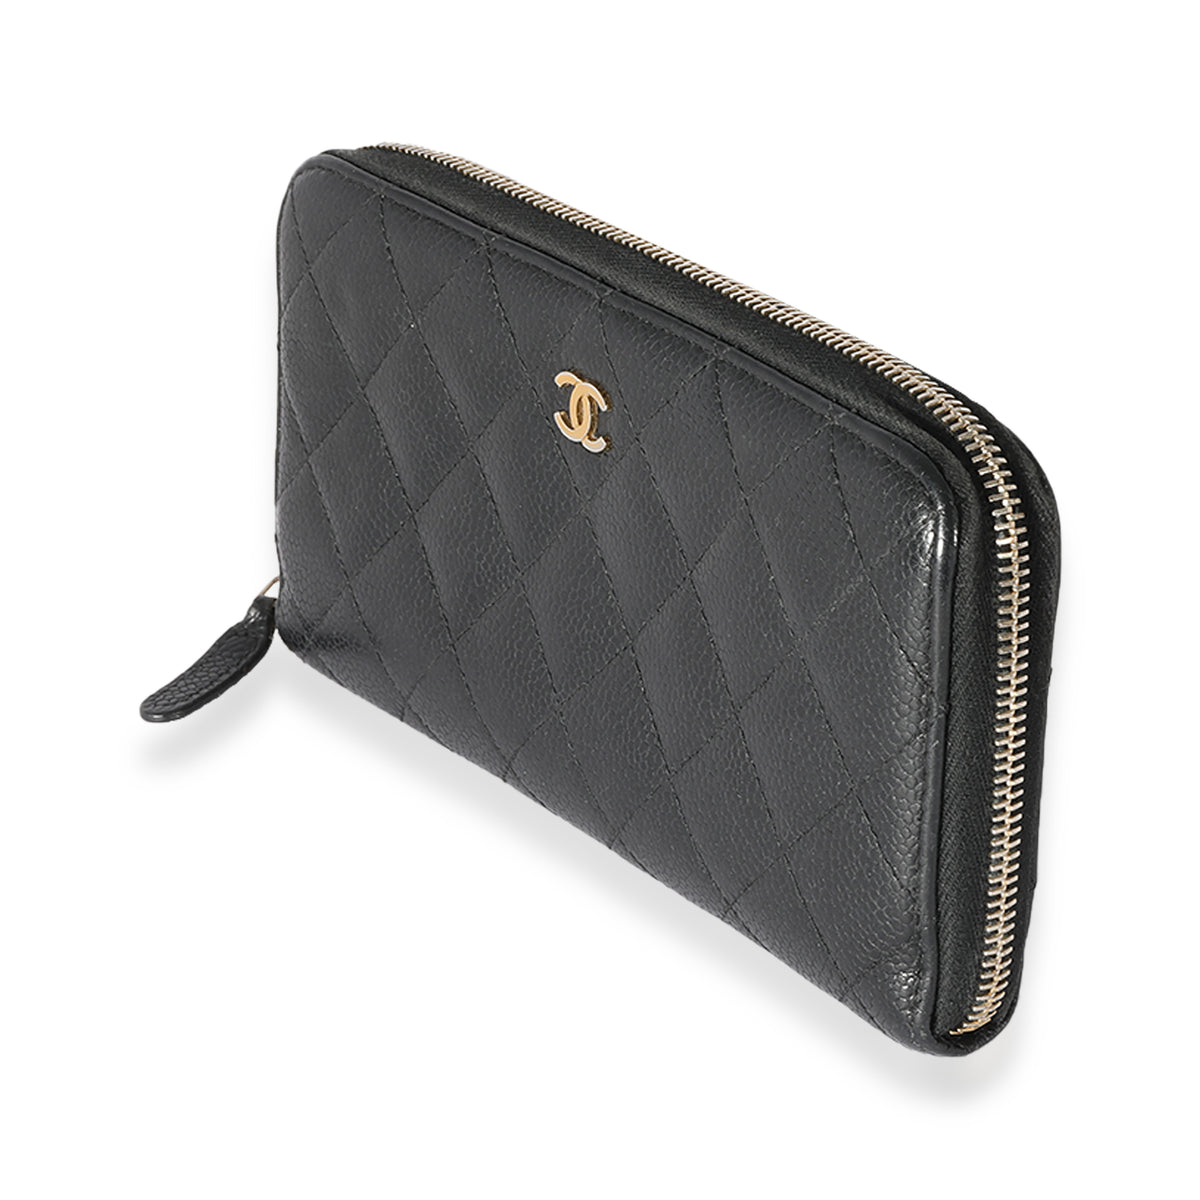 Chanel Black Quilted Caviar Leather L-Gusset Zip Wallet